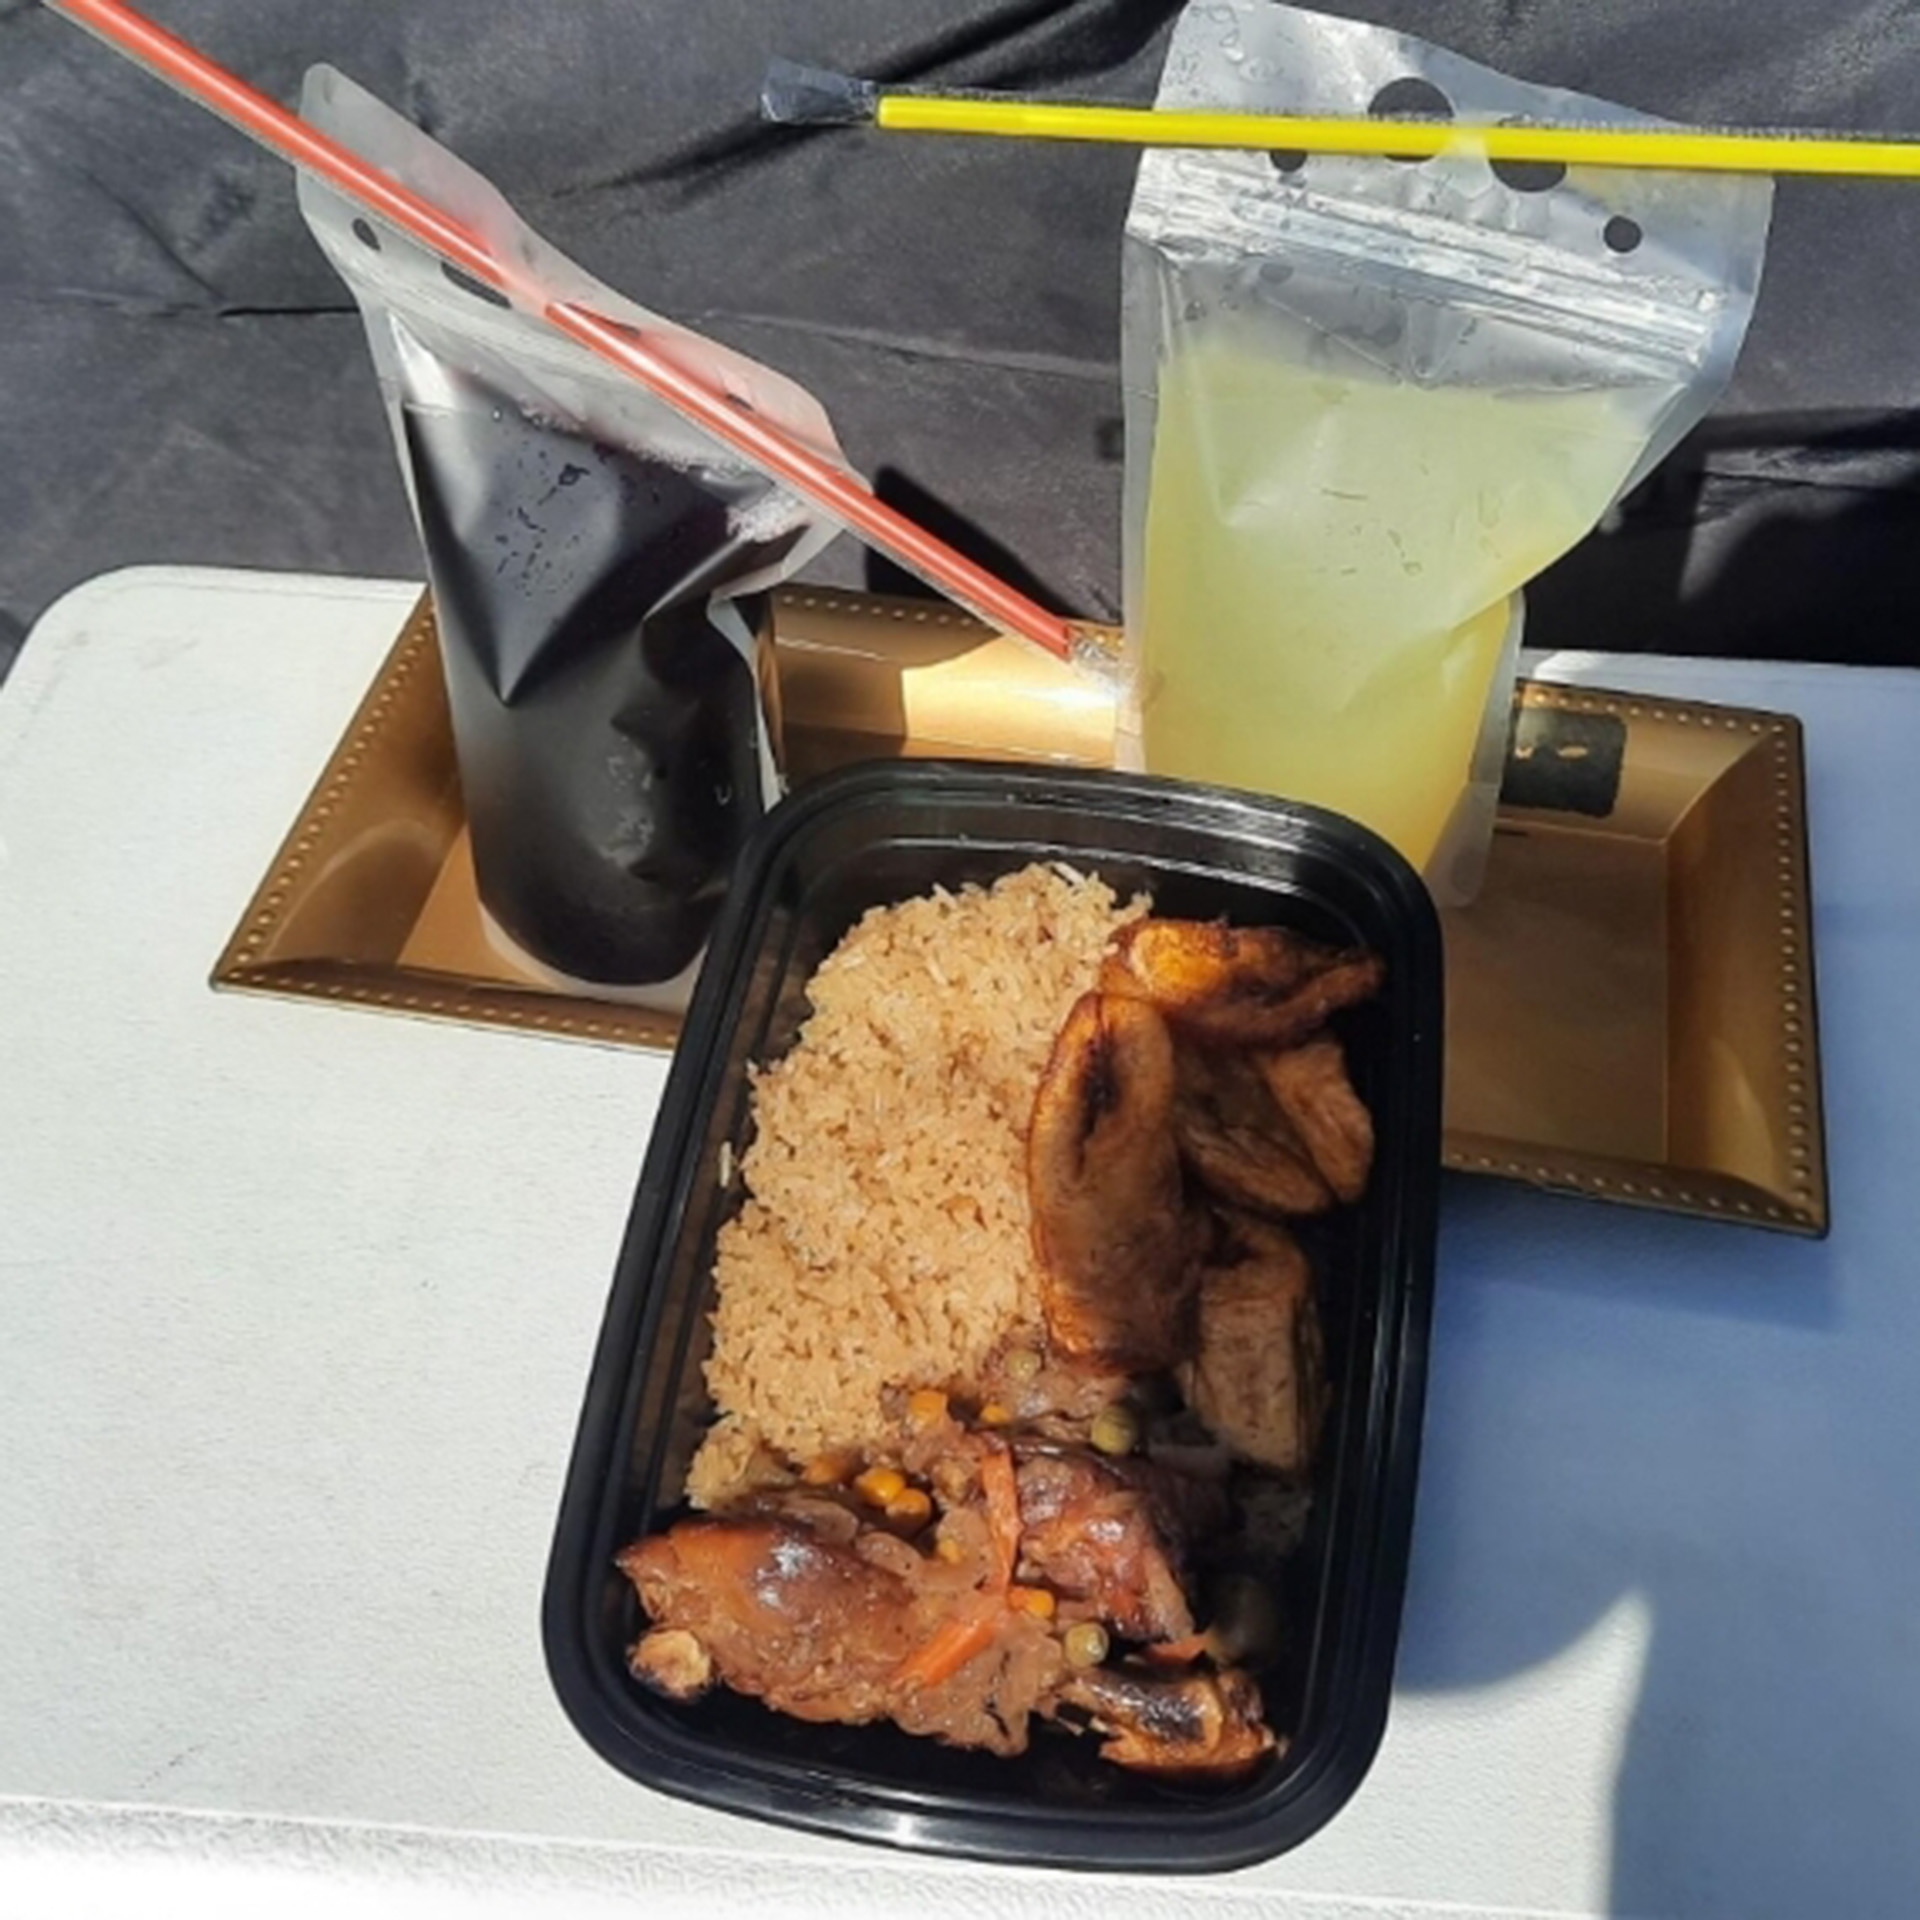 A takeout container of jollof rice and two plastic bags of juice.